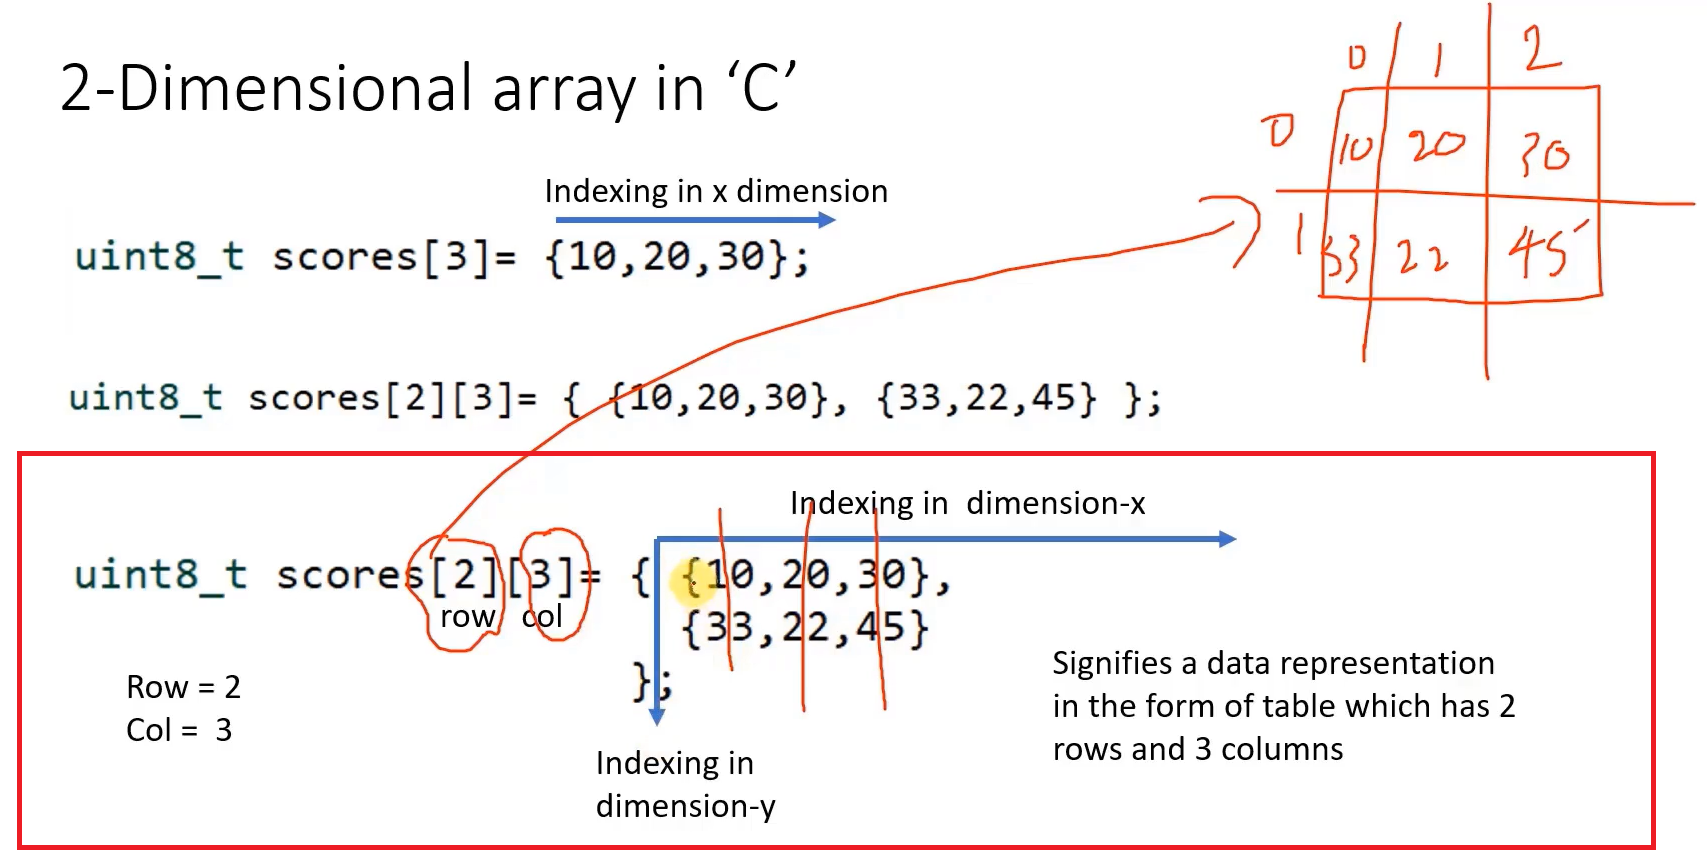 Figure 2. Example of 2-Dimensional array